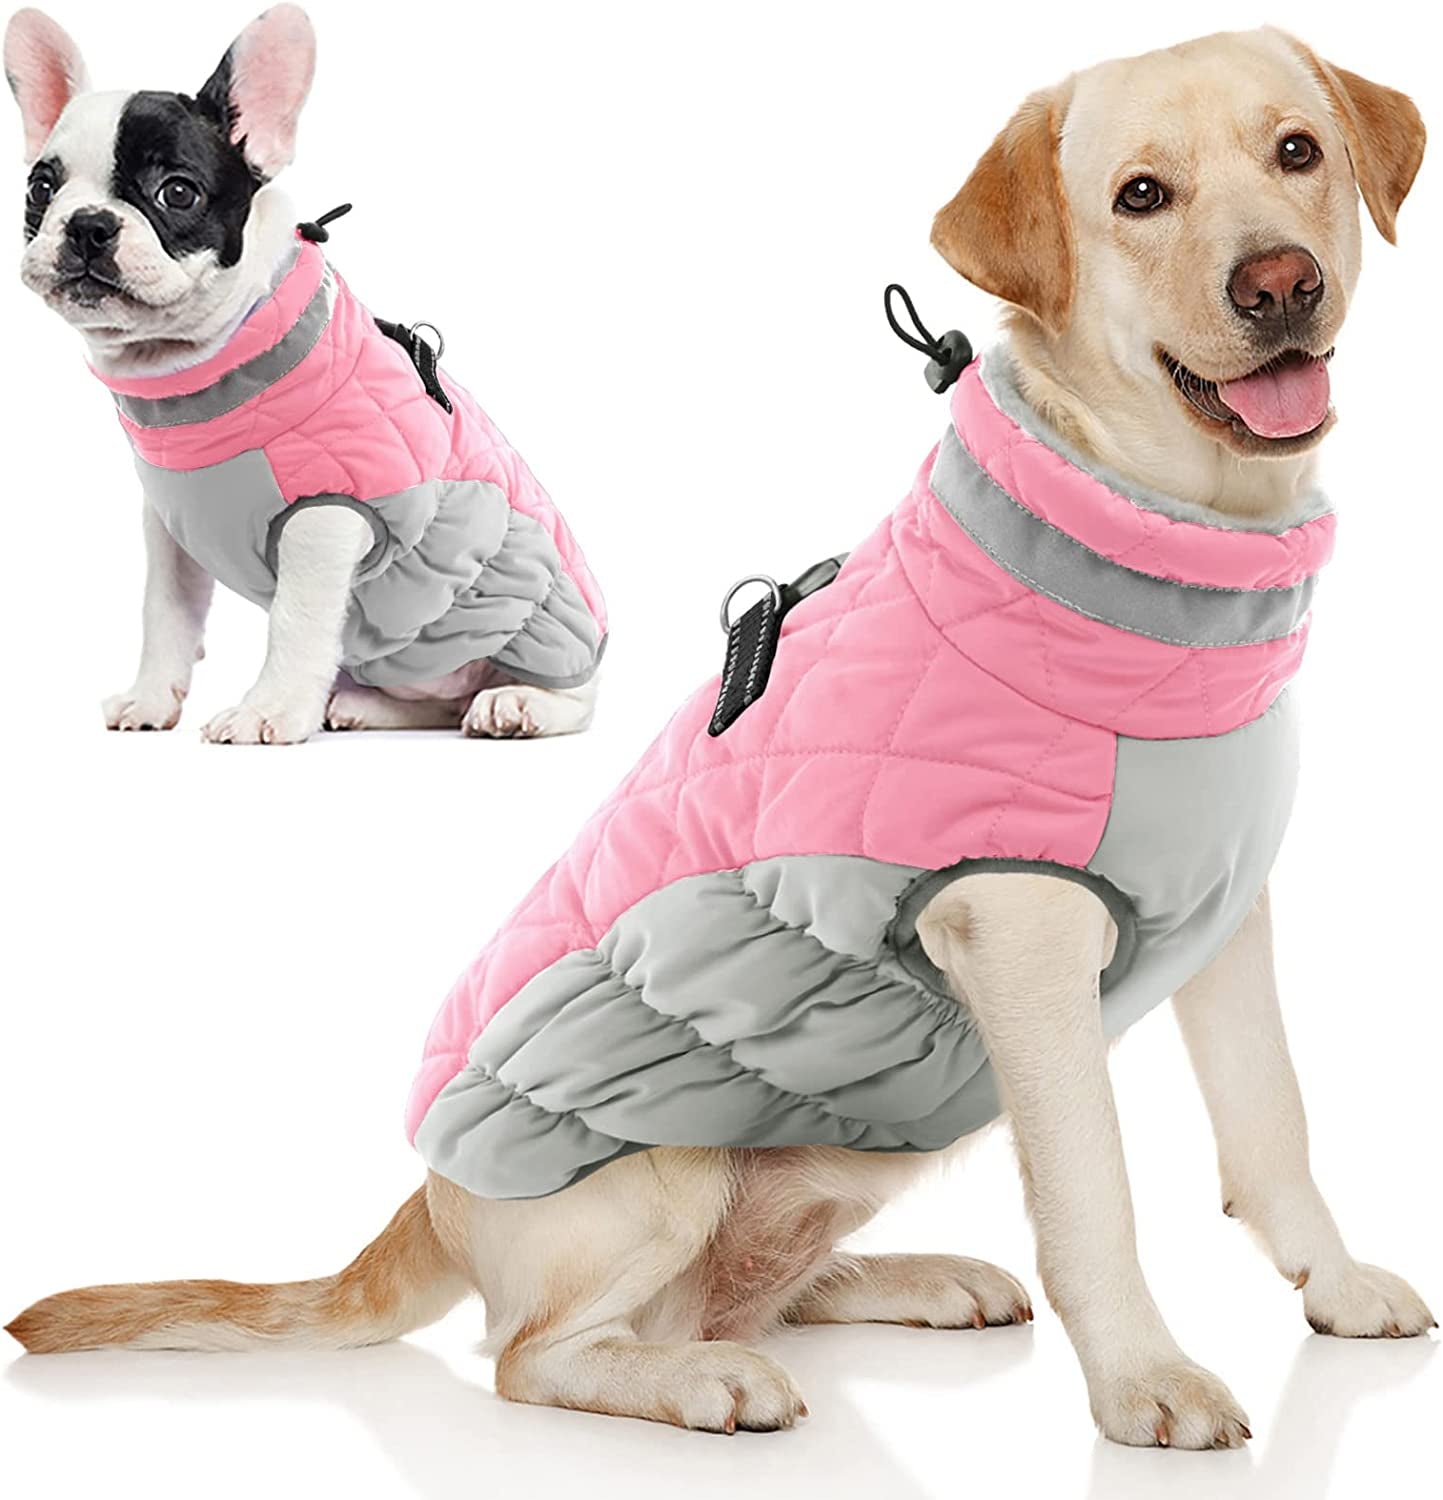  SlowTon Dog Jacket with Harness Built in, Waterproof Fleece  Winter Warm Dog Coats for Small Medium Dogs, Reflective Adjustable Furry  Puppy Vest Clothes for Outdoor Walking (Purple,Size Large) : Pet